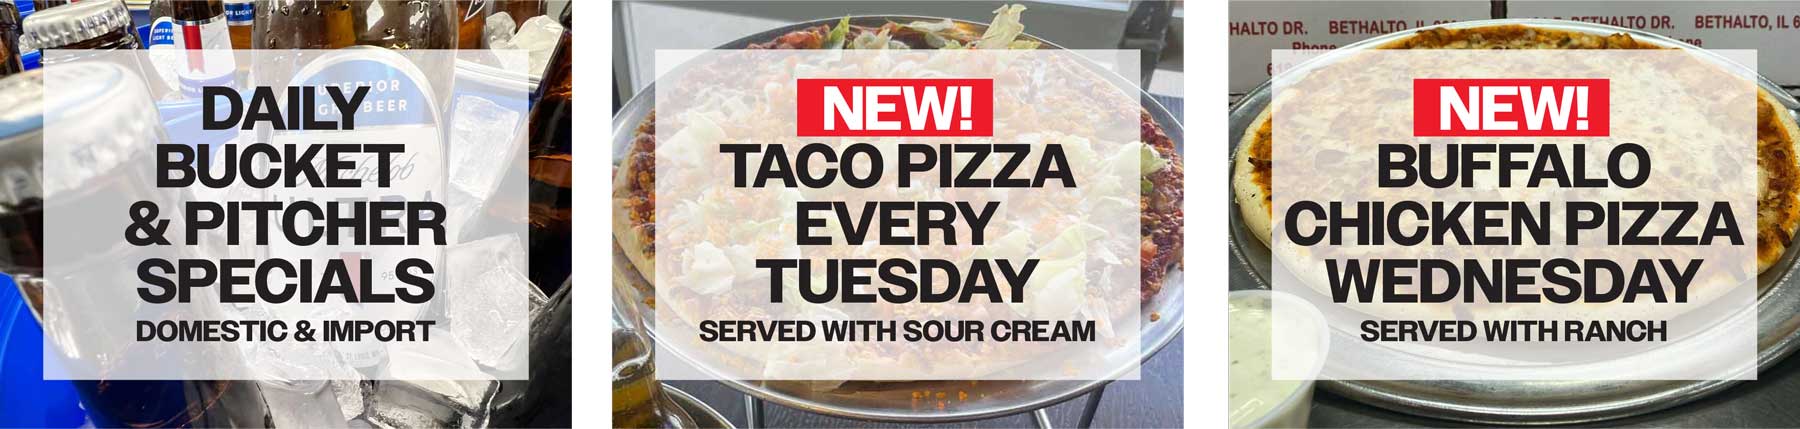 New beer, taco and chicken pizzas at Romas!